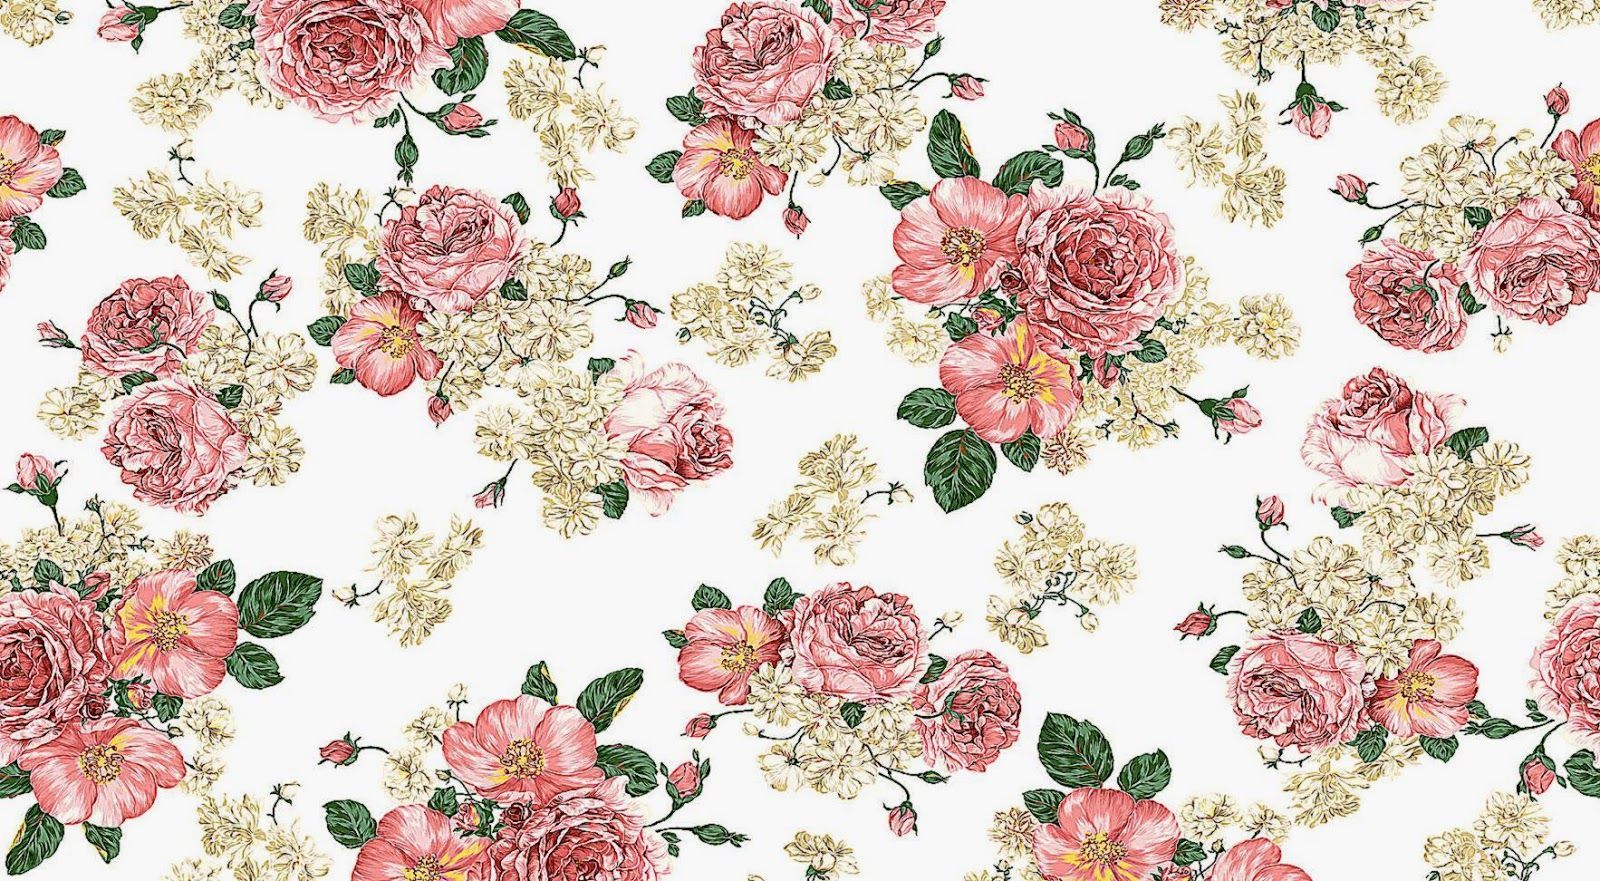 10 Greatest indie flower desktop wallpaper You Can Use It At No Cost ...